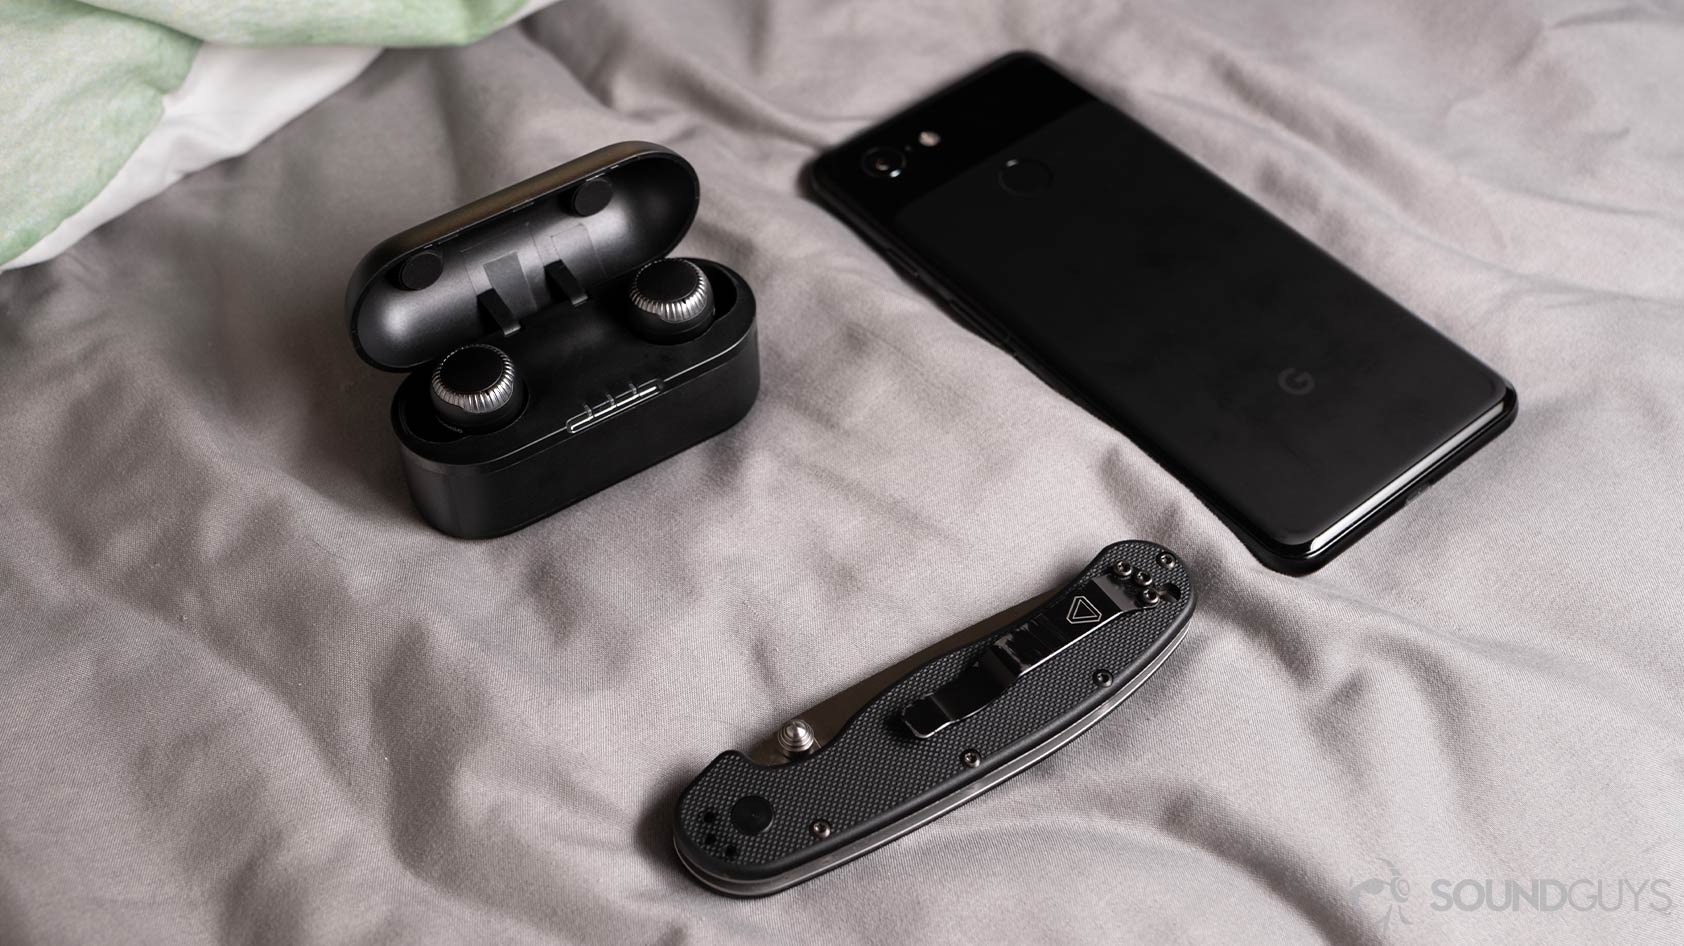 A photo of the Panasonic RZ-S300W true wireless earbuds next to a pocket knife and Google Pixel 3 smartphone.